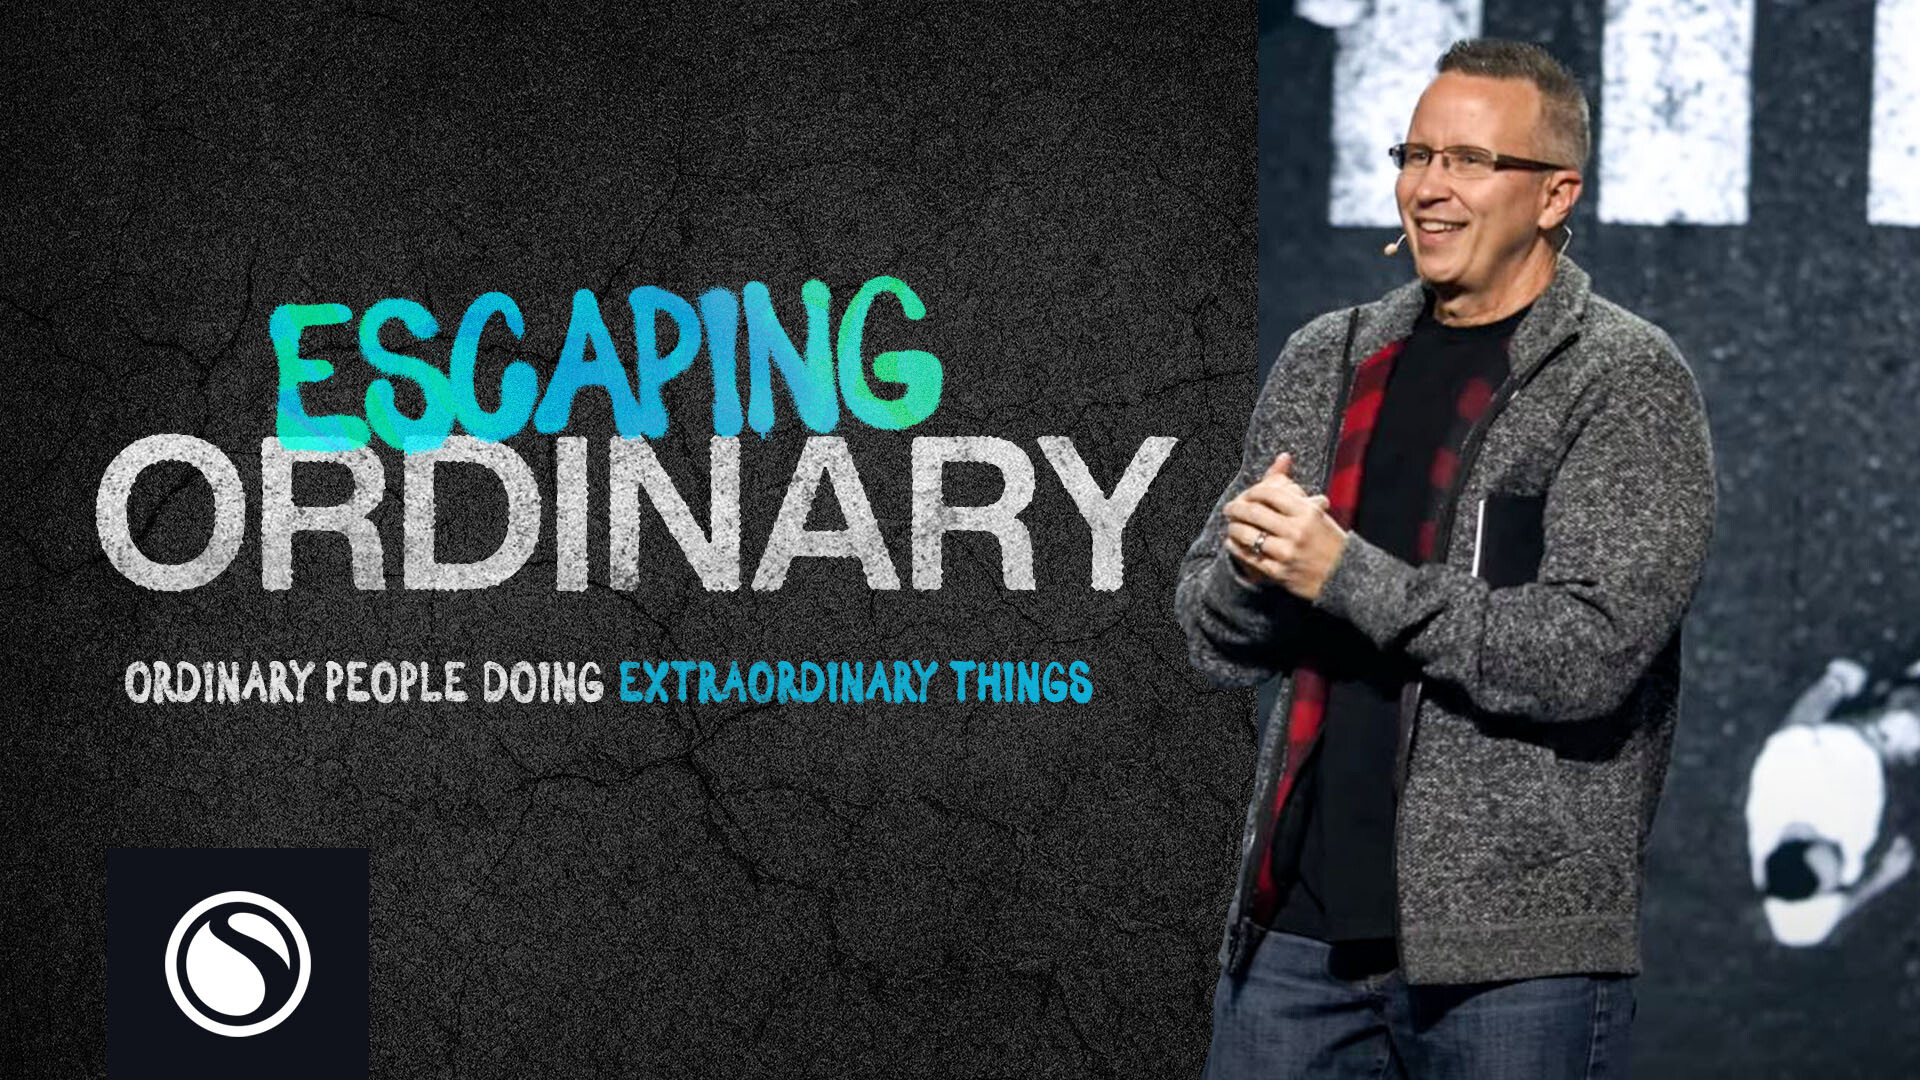 Watch Escaping Ordinary - Ordinary People Doing Extraordinary Things